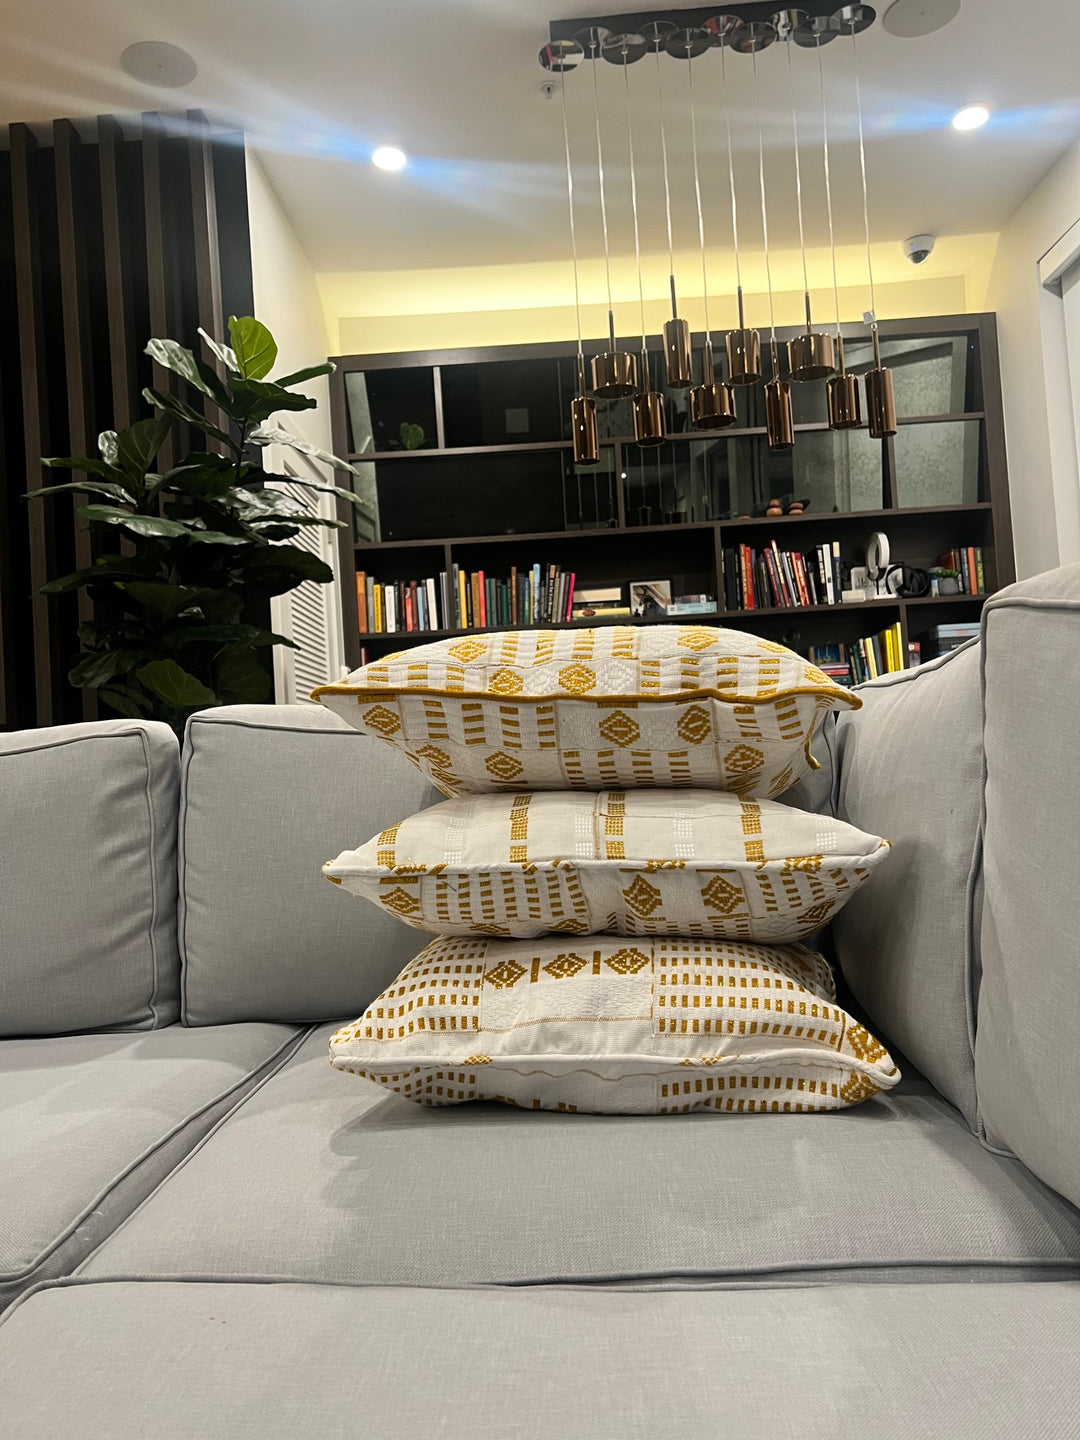 Fall in Love with Luxury: Obrempong Home's Handmade Kente Blankets